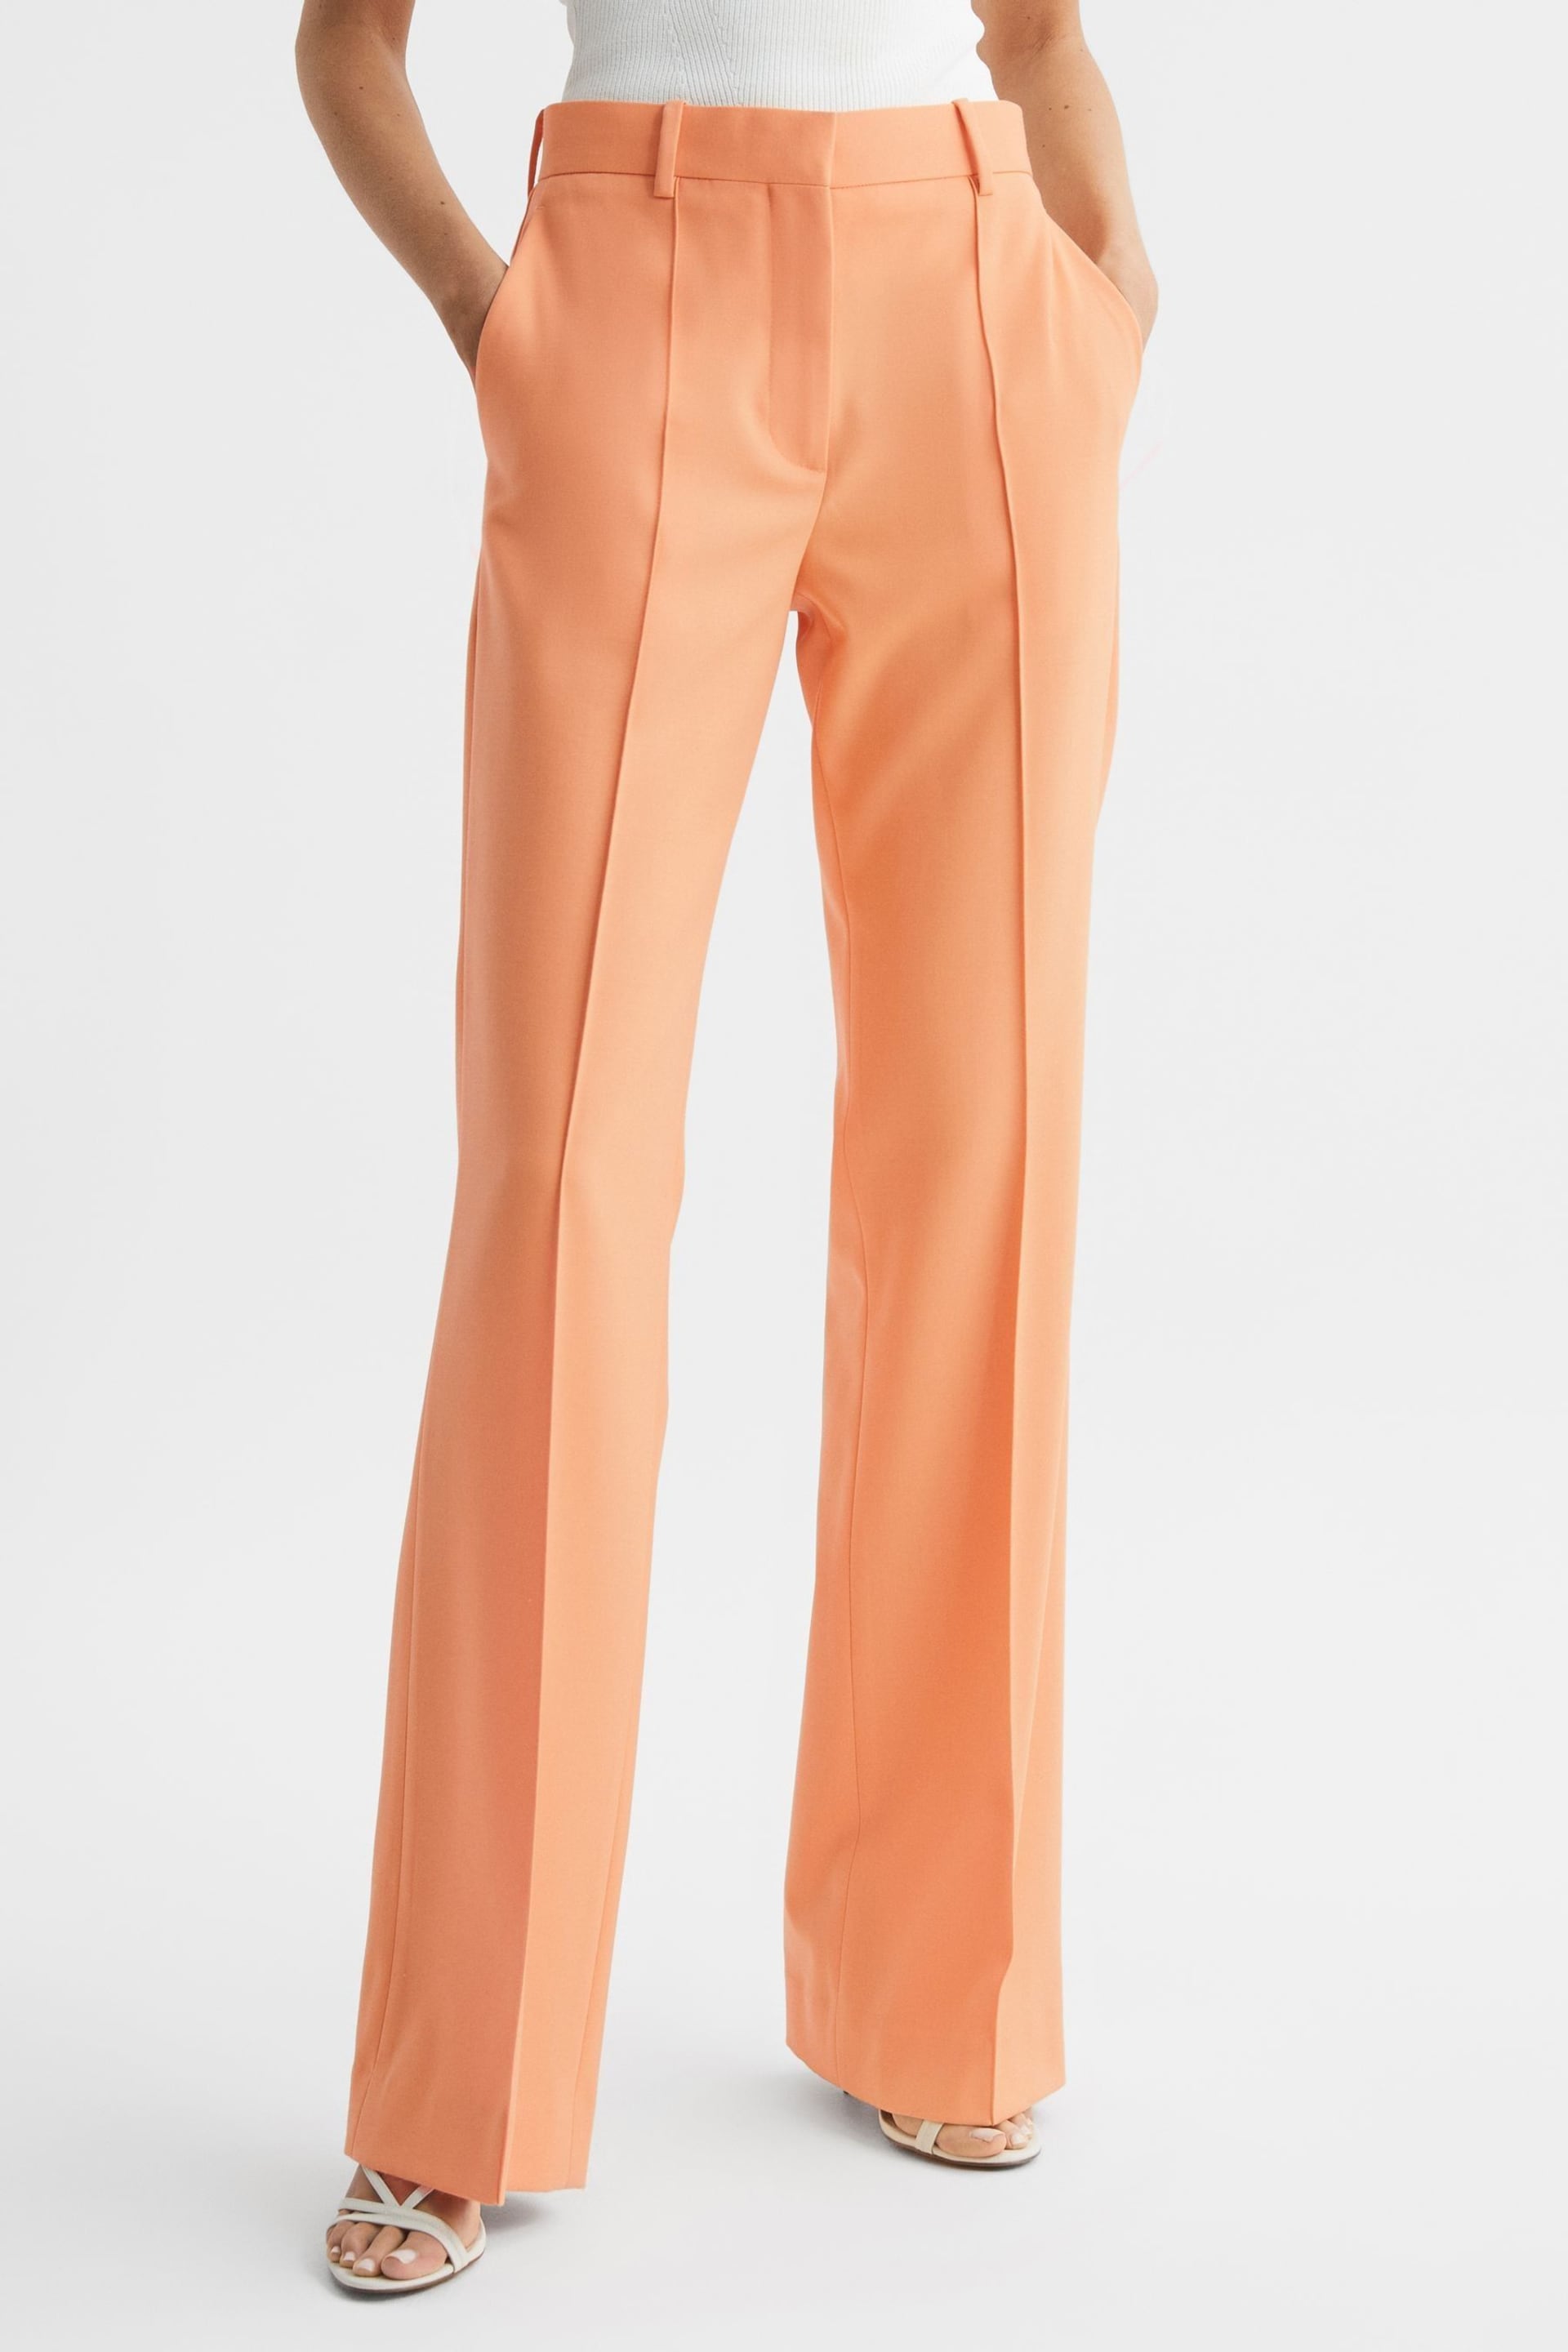 Reiss Orange Emmy Wide Leg Tailored Trousers - Image 3 of 7